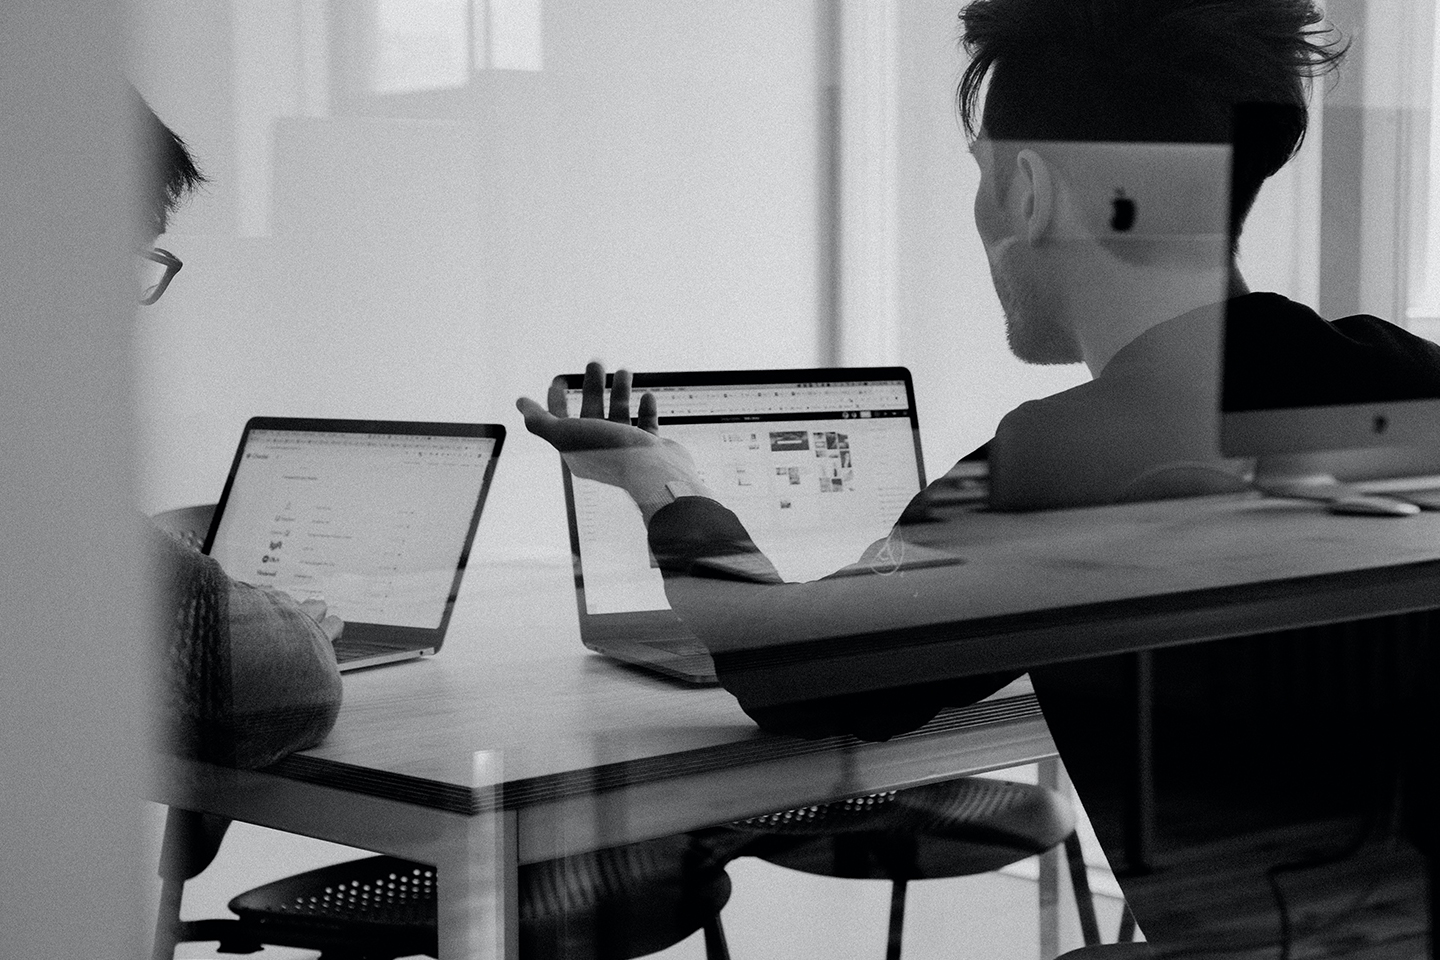 Male workers on laptops on a work desk. insights into the Future Fund, a UK government-backed scheme launched in 2020 to aid start-ups during the pandemic, as businesses approach the three-year maturity date.